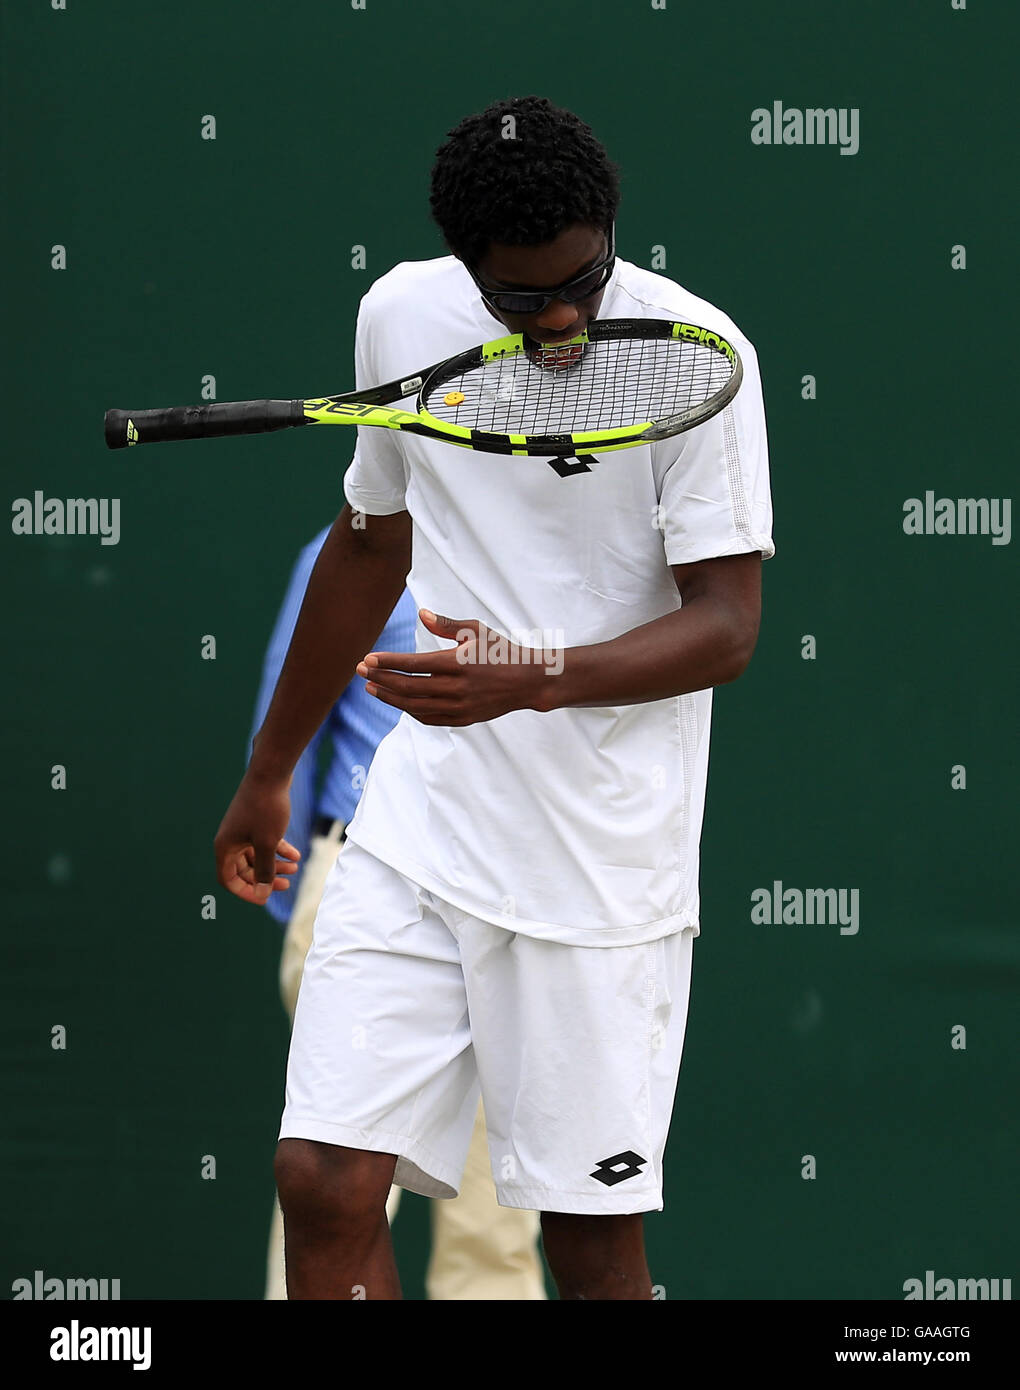 Olukayode Alafia Damina Ayeni in action in the boys singles on day seven of the Wimbledon Championships at the All England Lawn Tennis and Croquet Club, Wimbledon. Stock Photo